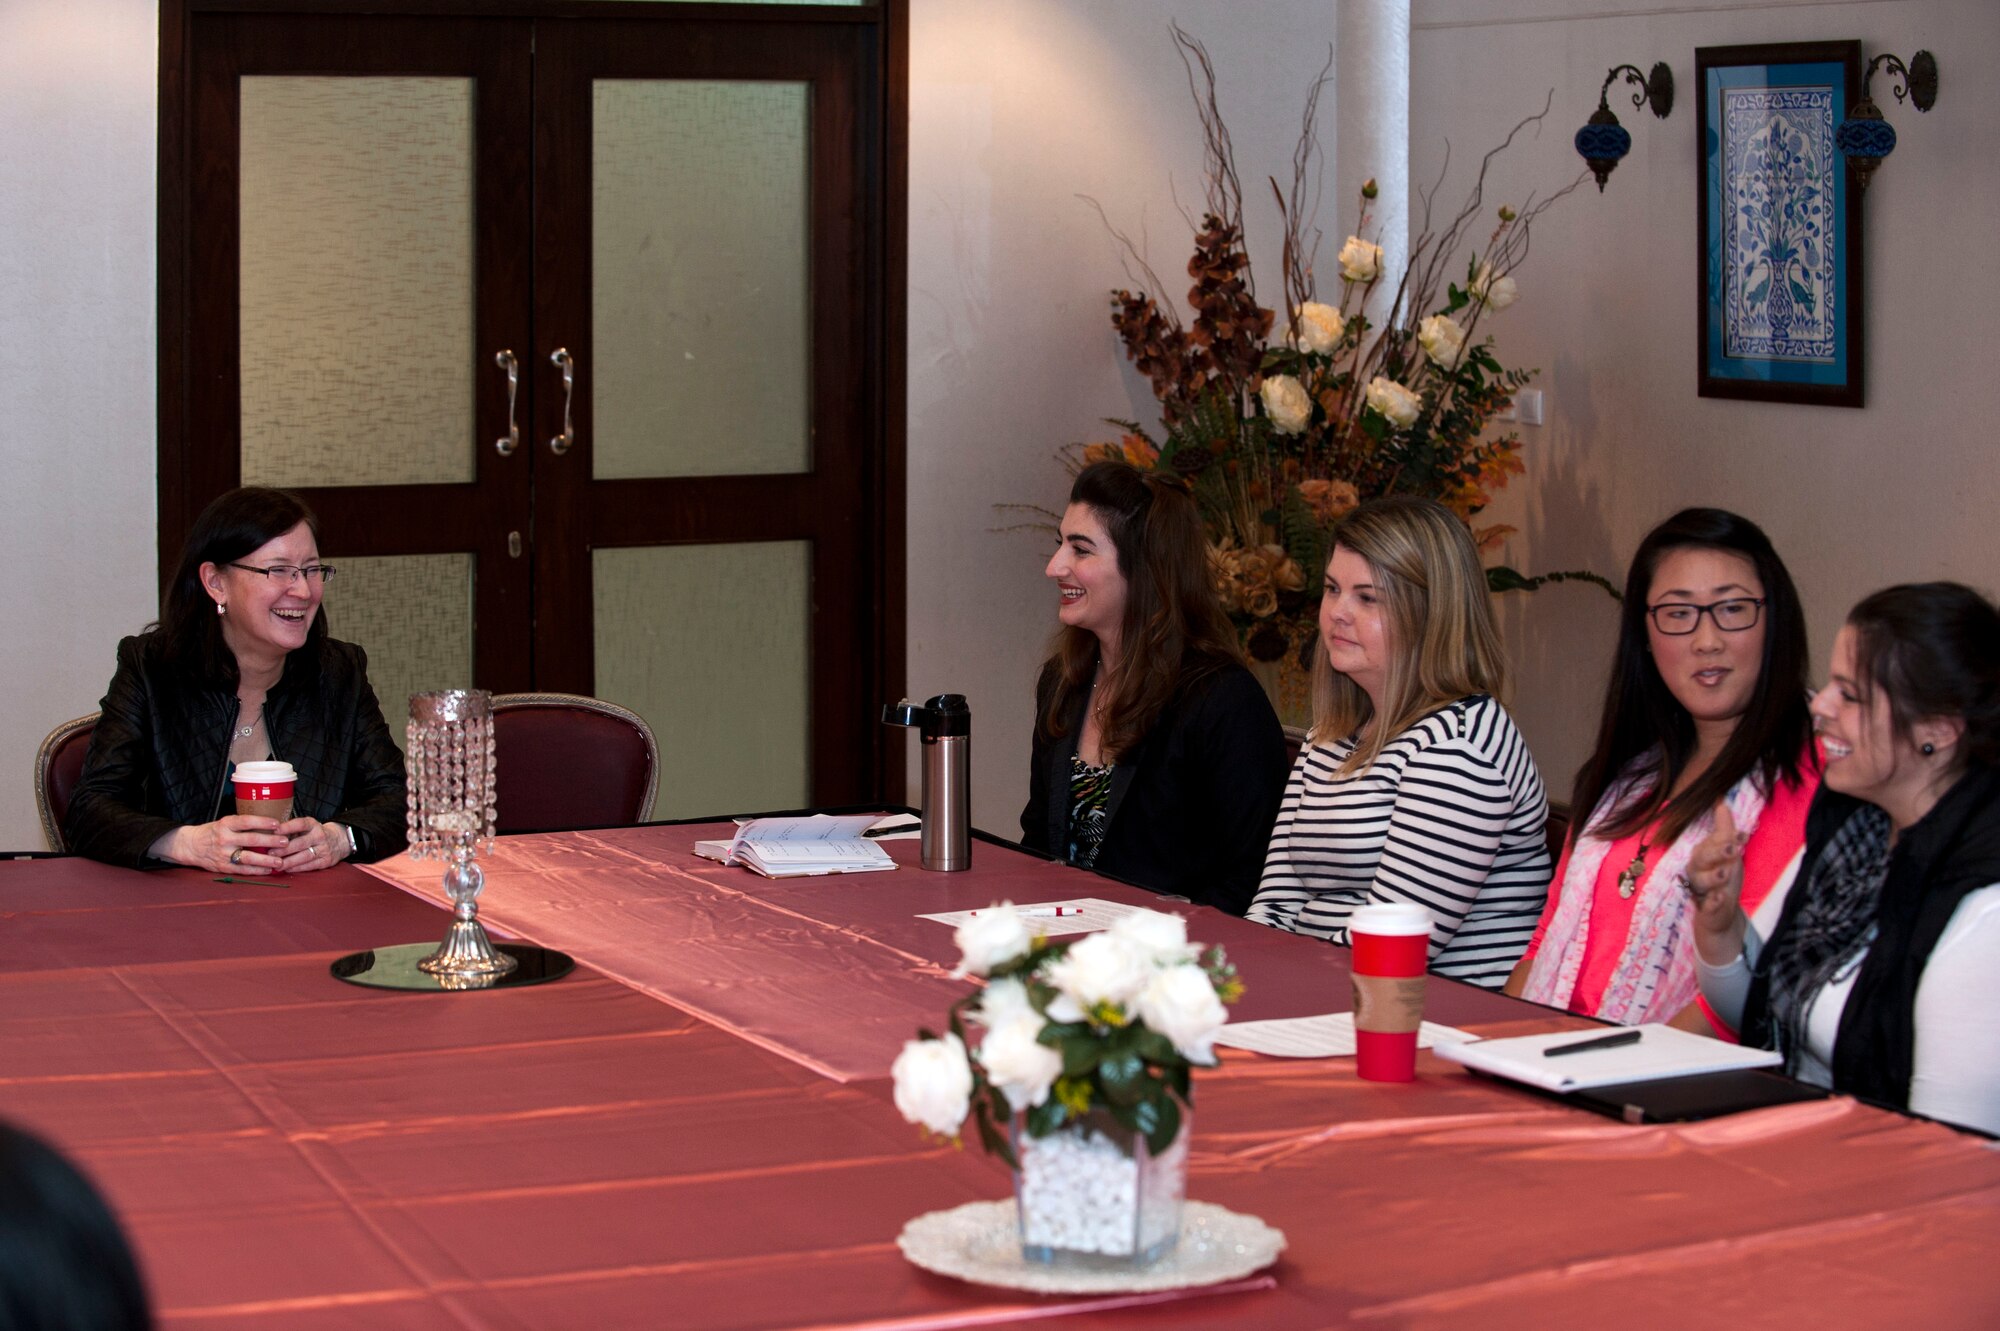 Ricki Selva (left) meets with Incirlik’s Key Spouses during a base visit Nov. 25, 2015, at Incirlik Air Base, Turkey. Mrs. Selva, a member of the first Air Force Academy class to include women and wife of Gen. Paul Selva, Vice Chairman of the Joint Chiefs of Staff, discussed current issues facing Incirlik spouses and provided feedback. (U.S. Air Force photo by Staff Sgt. Jack Sanders/Released)